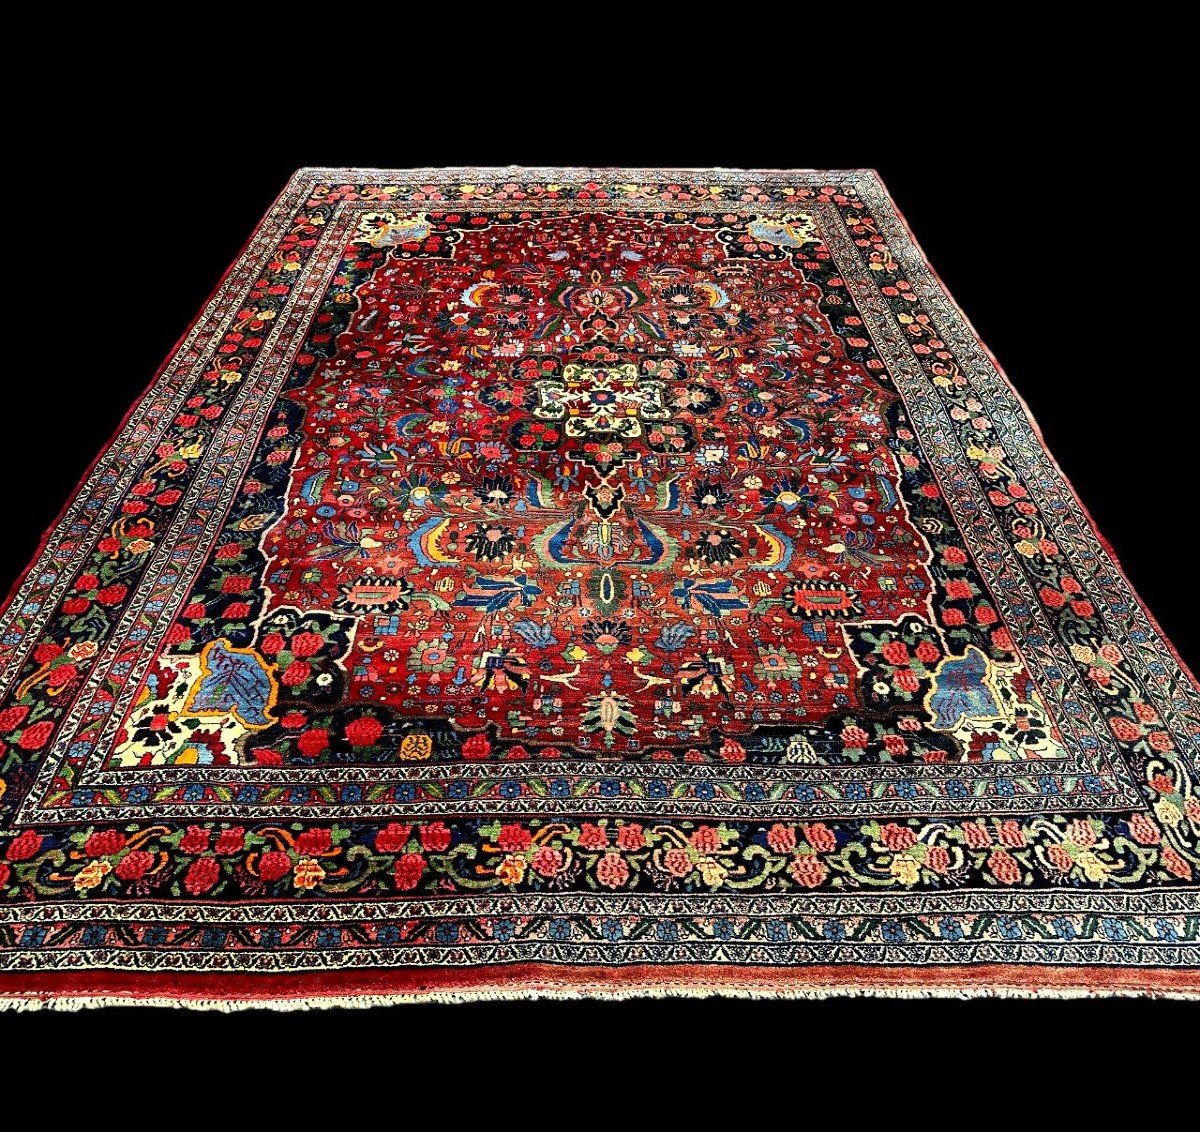 Old Bidjar Rug, 270 X 355 Cm, Hand-knotted Wool Circa 1920-1930 In Iran, In Very Good Condition -photo-8